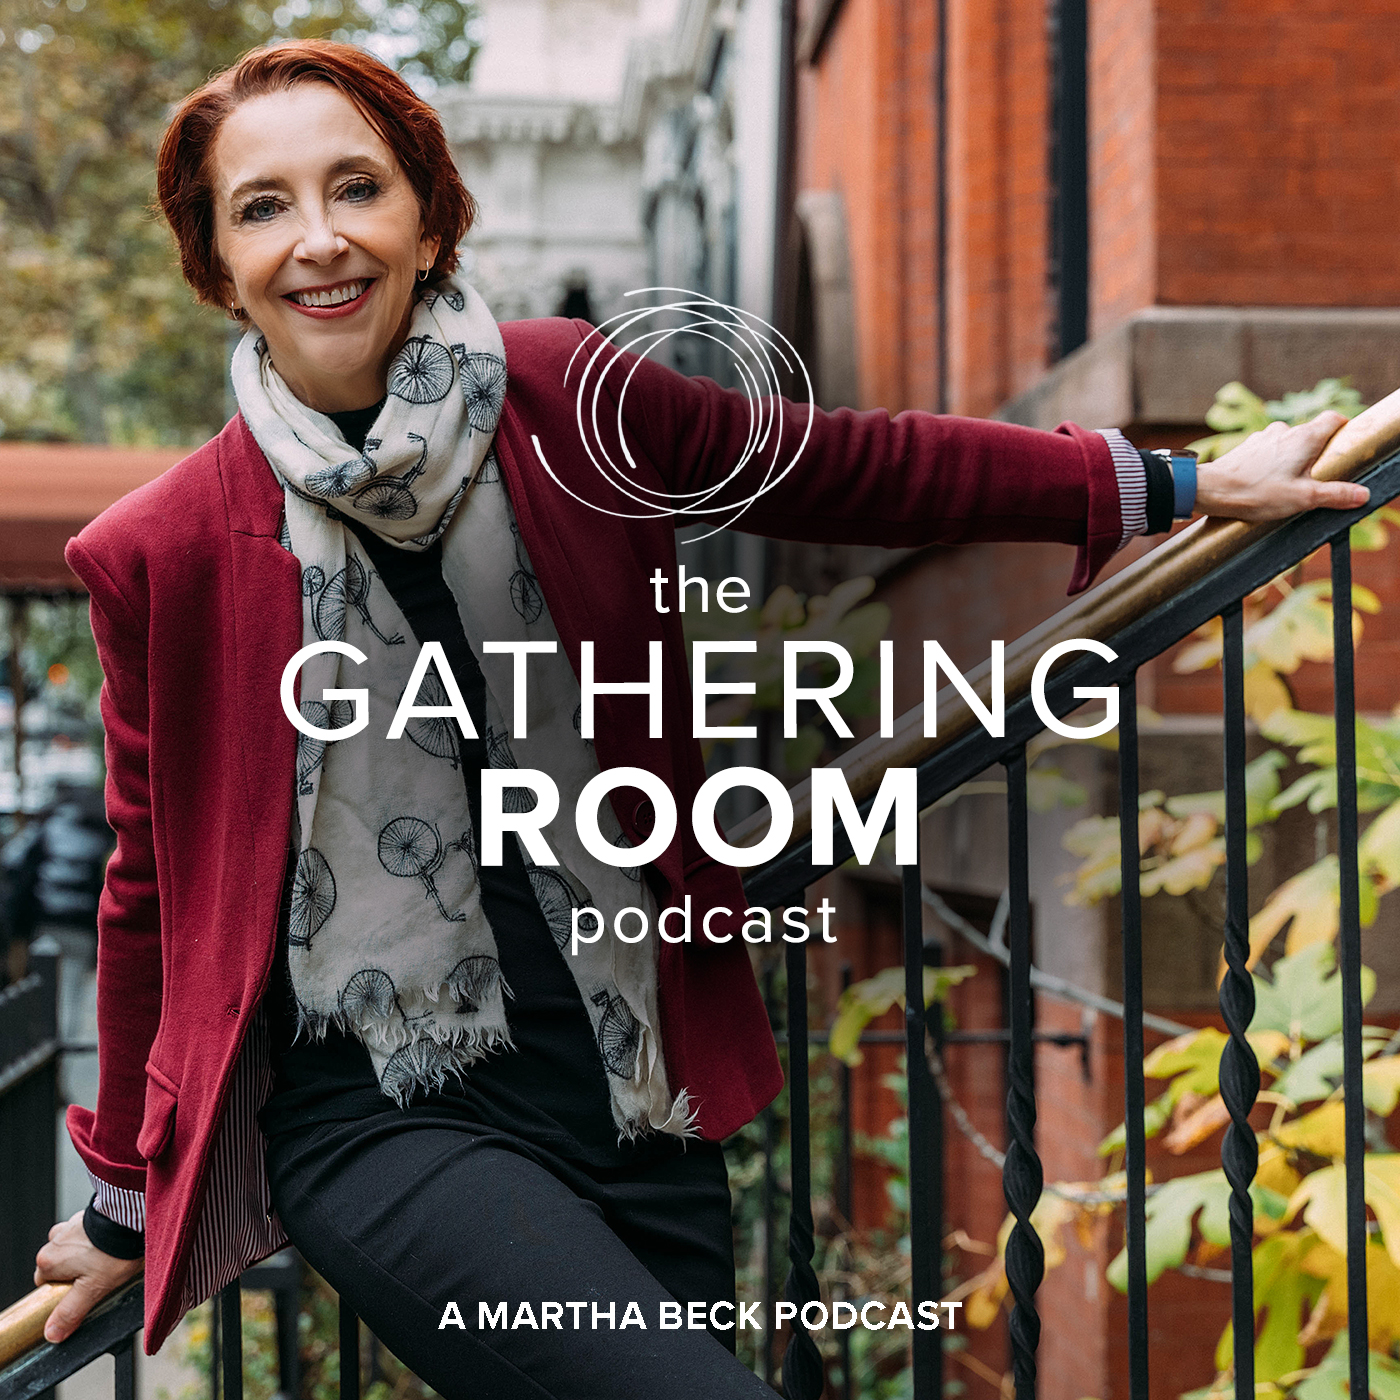 Martha standing on the steps wearing a scarf with the words The Gathering Room Podcast on the image.